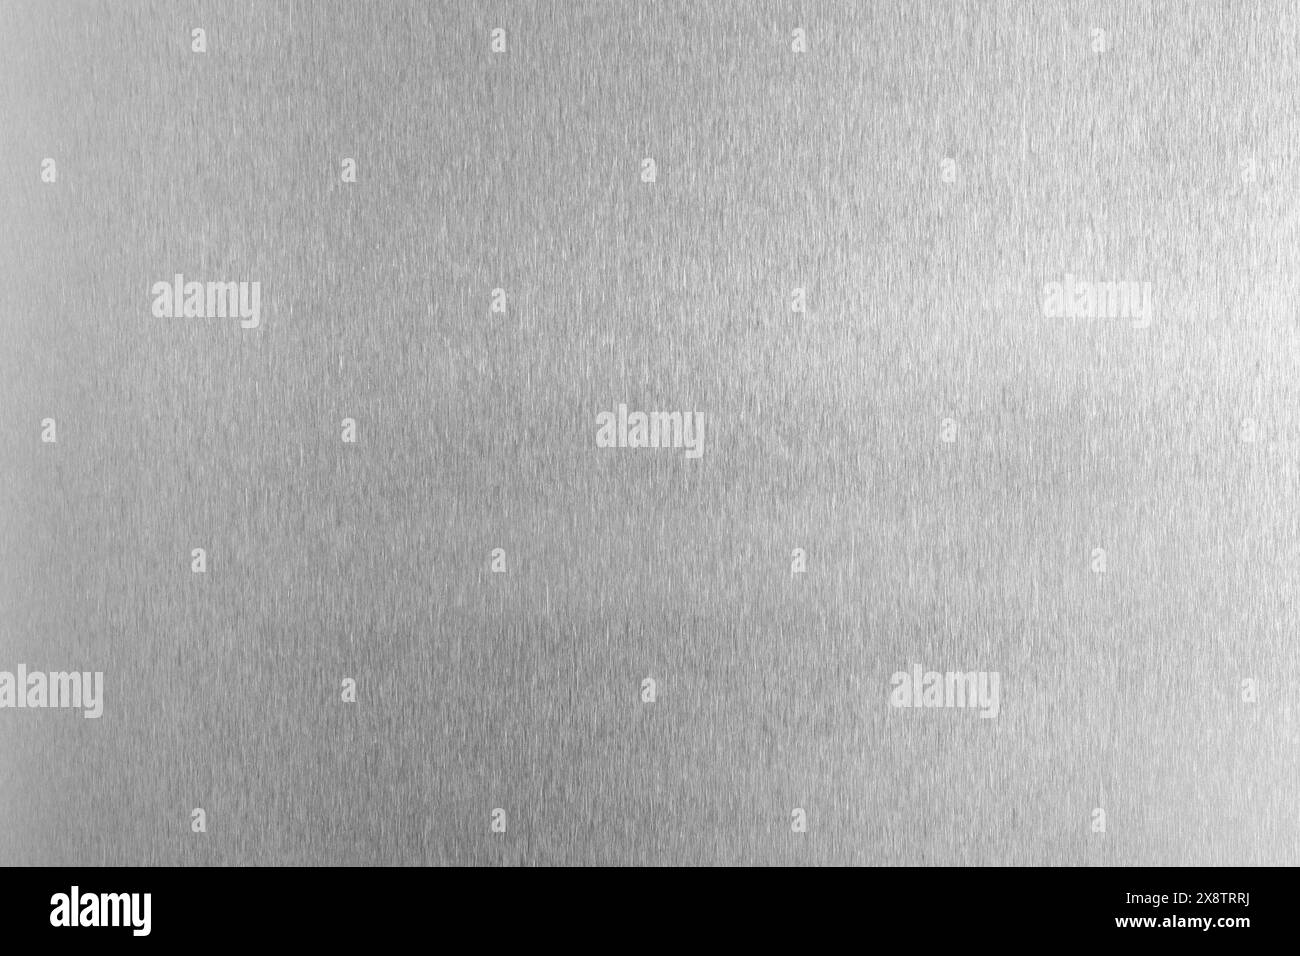 Shiny silver foil as background, top view Stock Photo